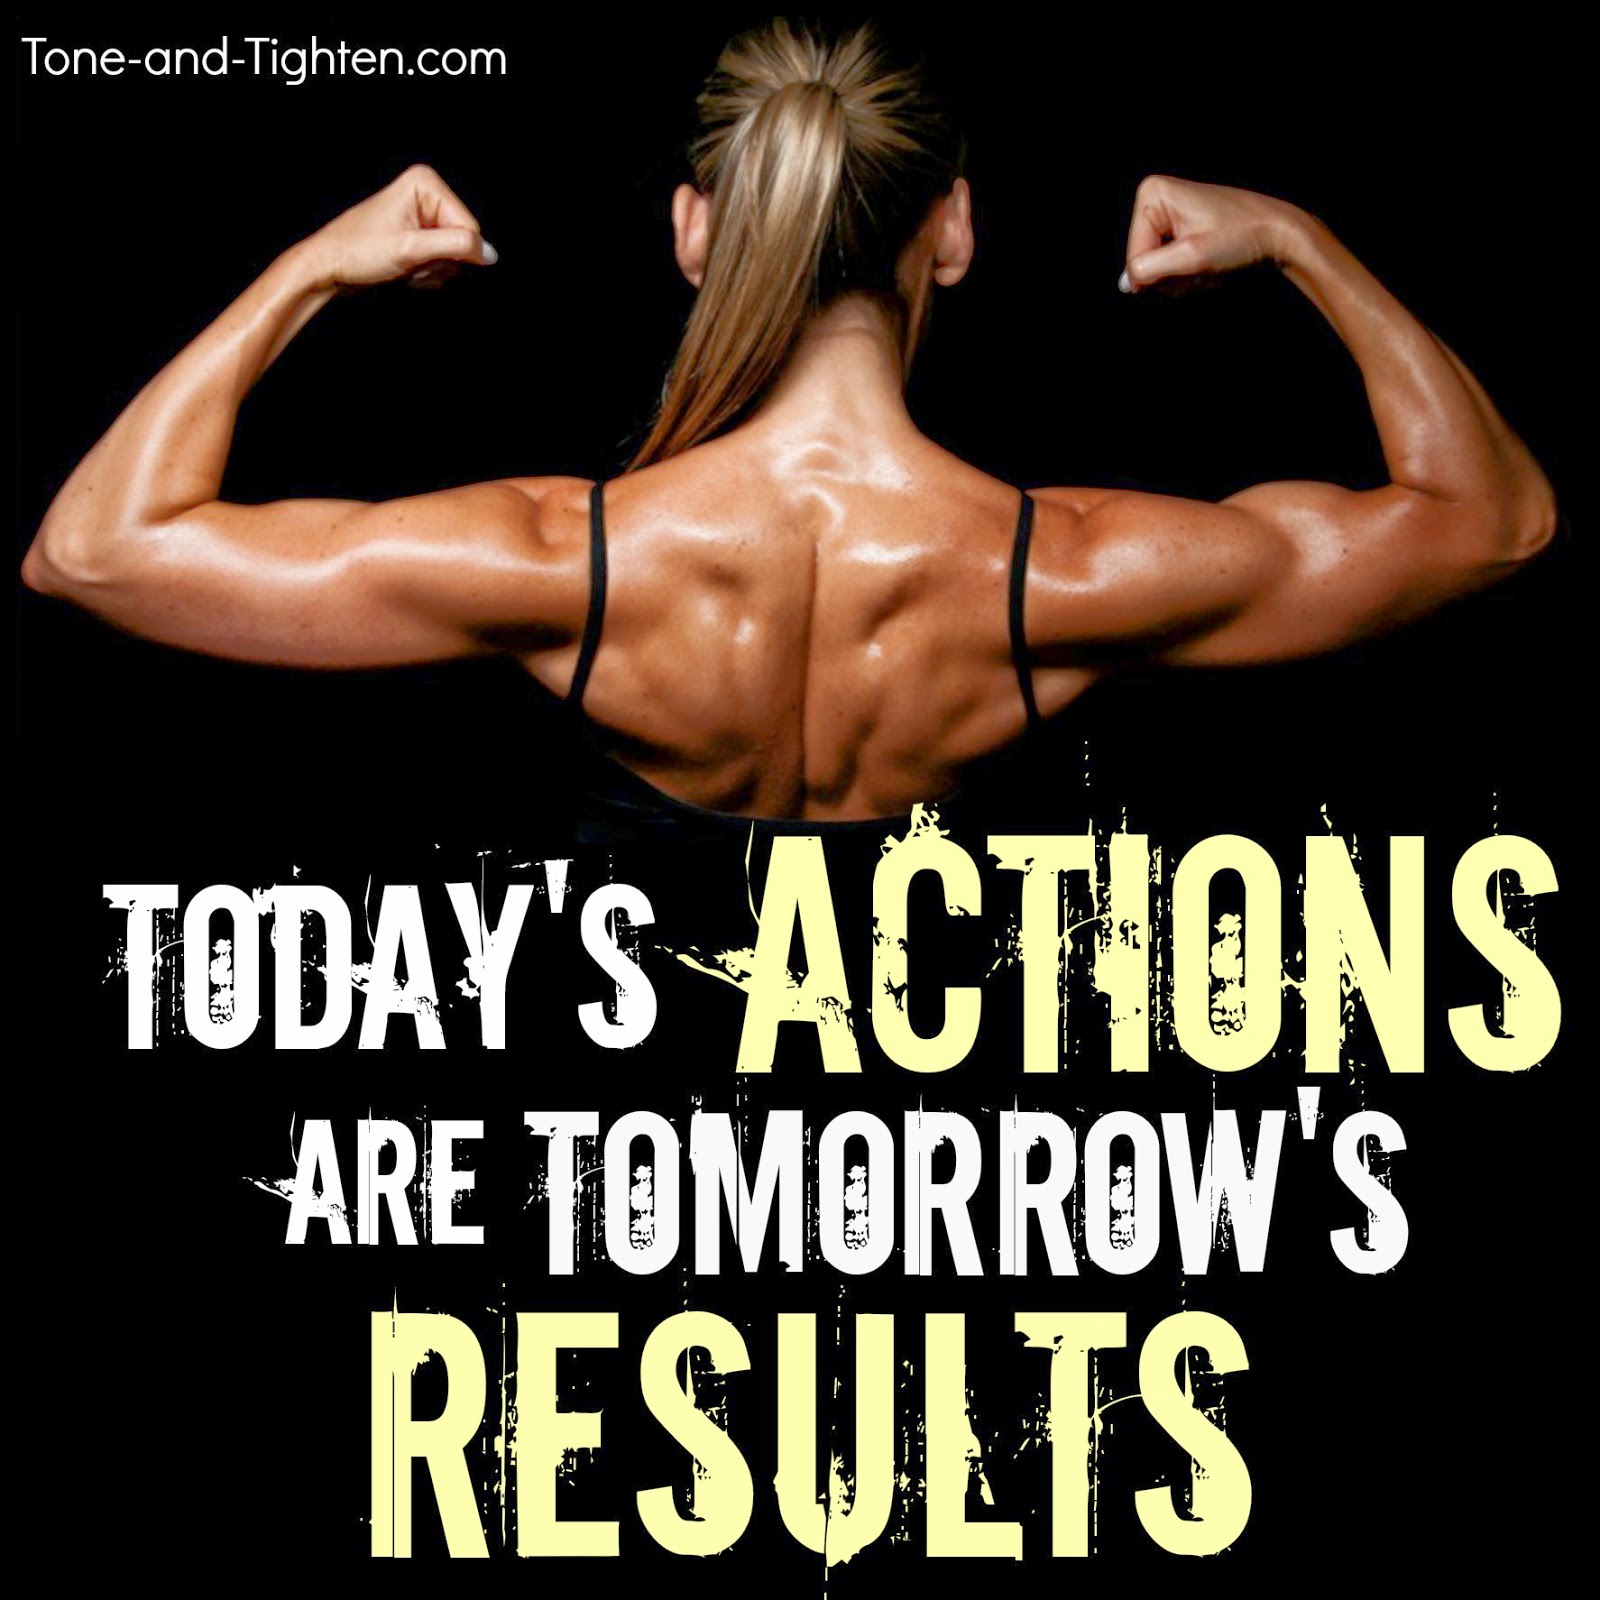 Fitness motivation quotes for better workout — Stock Photo 